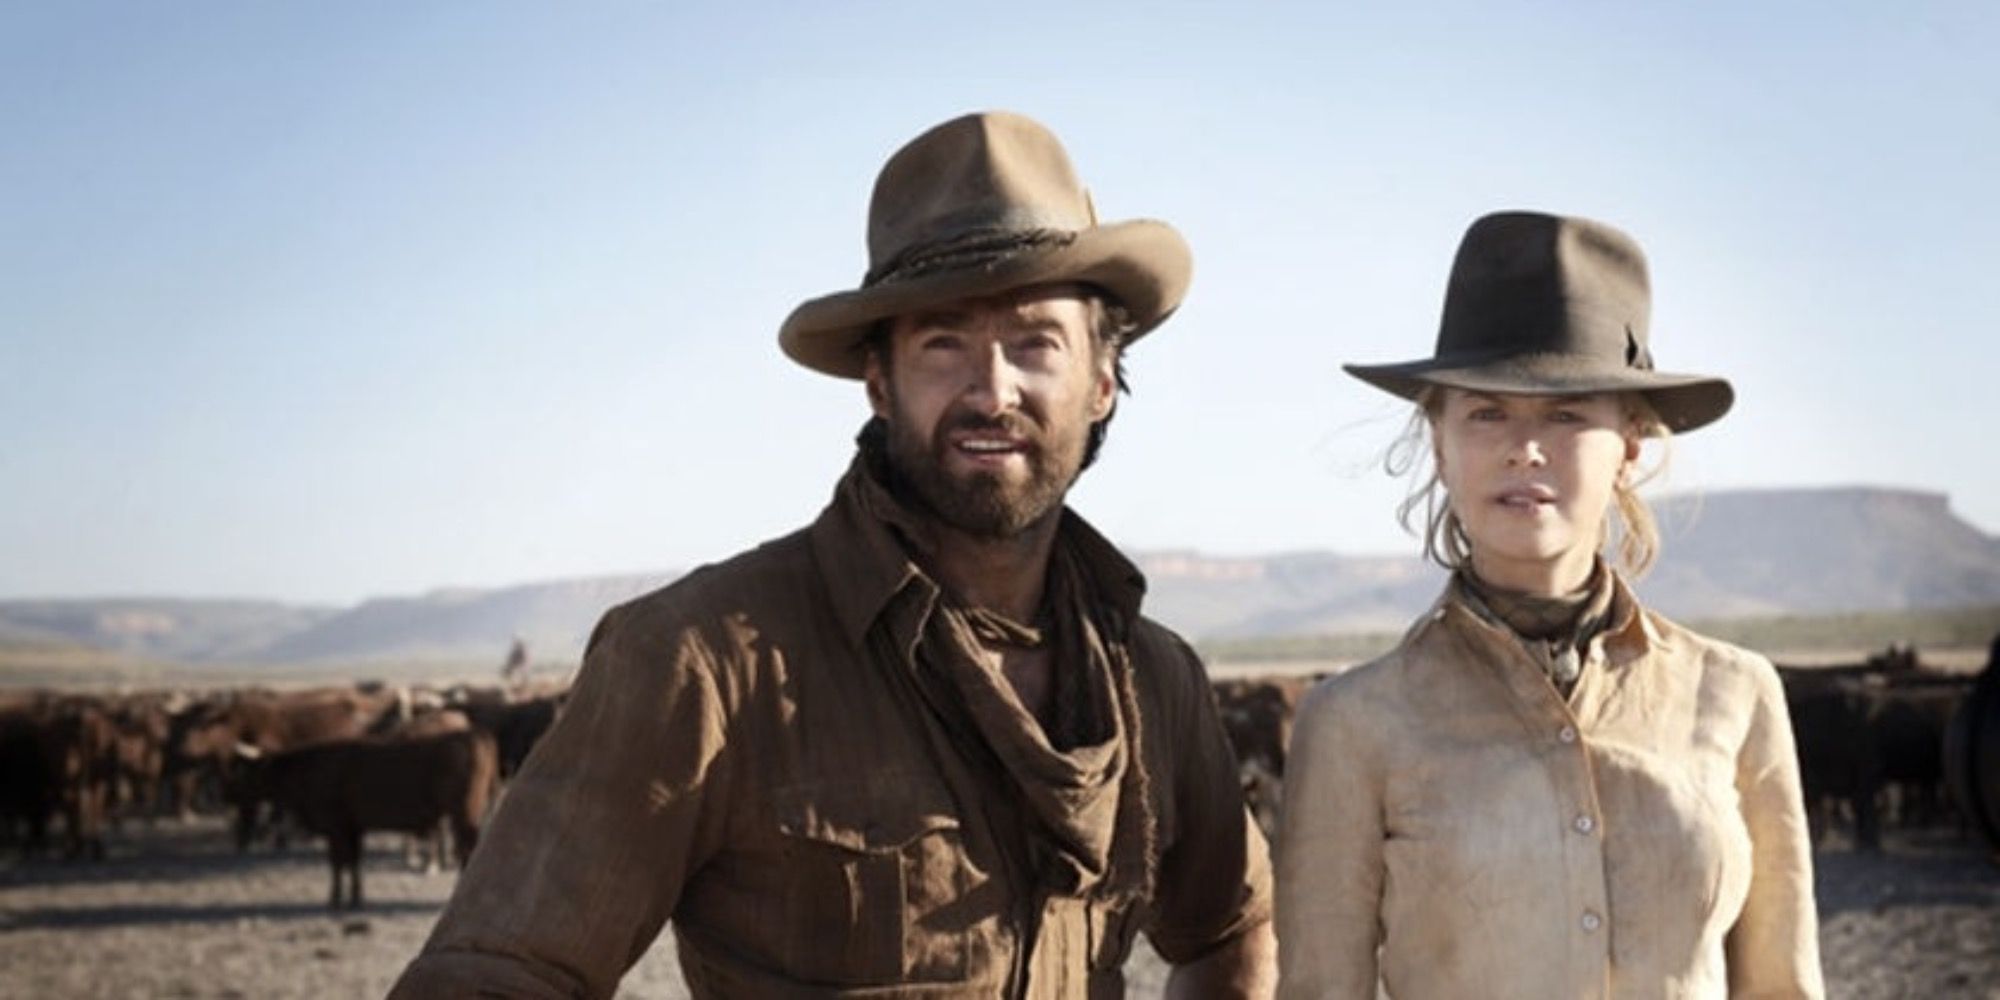 Hugh Jackman and Nicole Kidman in the outback